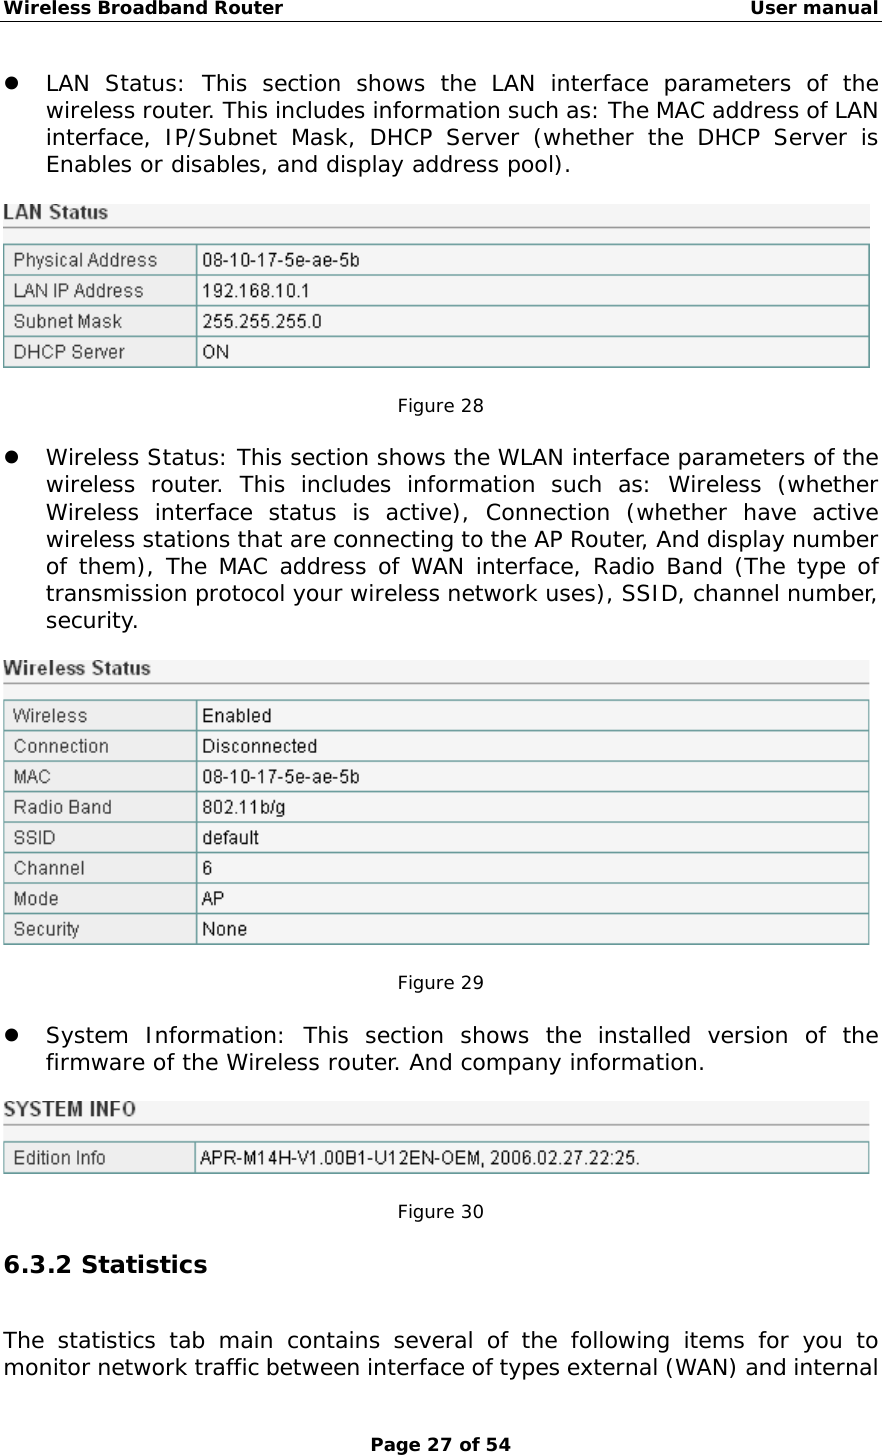 Wireless Broadband Router                                                   User manual Page 27 of 54 z LAN Status: This section shows the LAN interface parameters of the wireless router. This includes information such as: The MAC address of LAN interface, IP/Subnet Mask, DHCP Server (whether the DHCP Server is Enables or disables, and display address pool).    Figure 28  z Wireless Status: This section shows the WLAN interface parameters of the wireless router. This includes information such as: Wireless (whether Wireless interface status is active), Connection (whether have active wireless stations that are connecting to the AP Router, And display number of them), The MAC address of WAN interface, Radio Band (The type of transmission protocol your wireless network uses), SSID, channel number, security.    Figure 29  z System Information: This section shows the installed version of the firmware of the Wireless router. And company information.    Figure 30 6.3.2 Statistics The statistics tab main contains several of the following items for you to monitor network traffic between interface of types external (WAN) and internal 